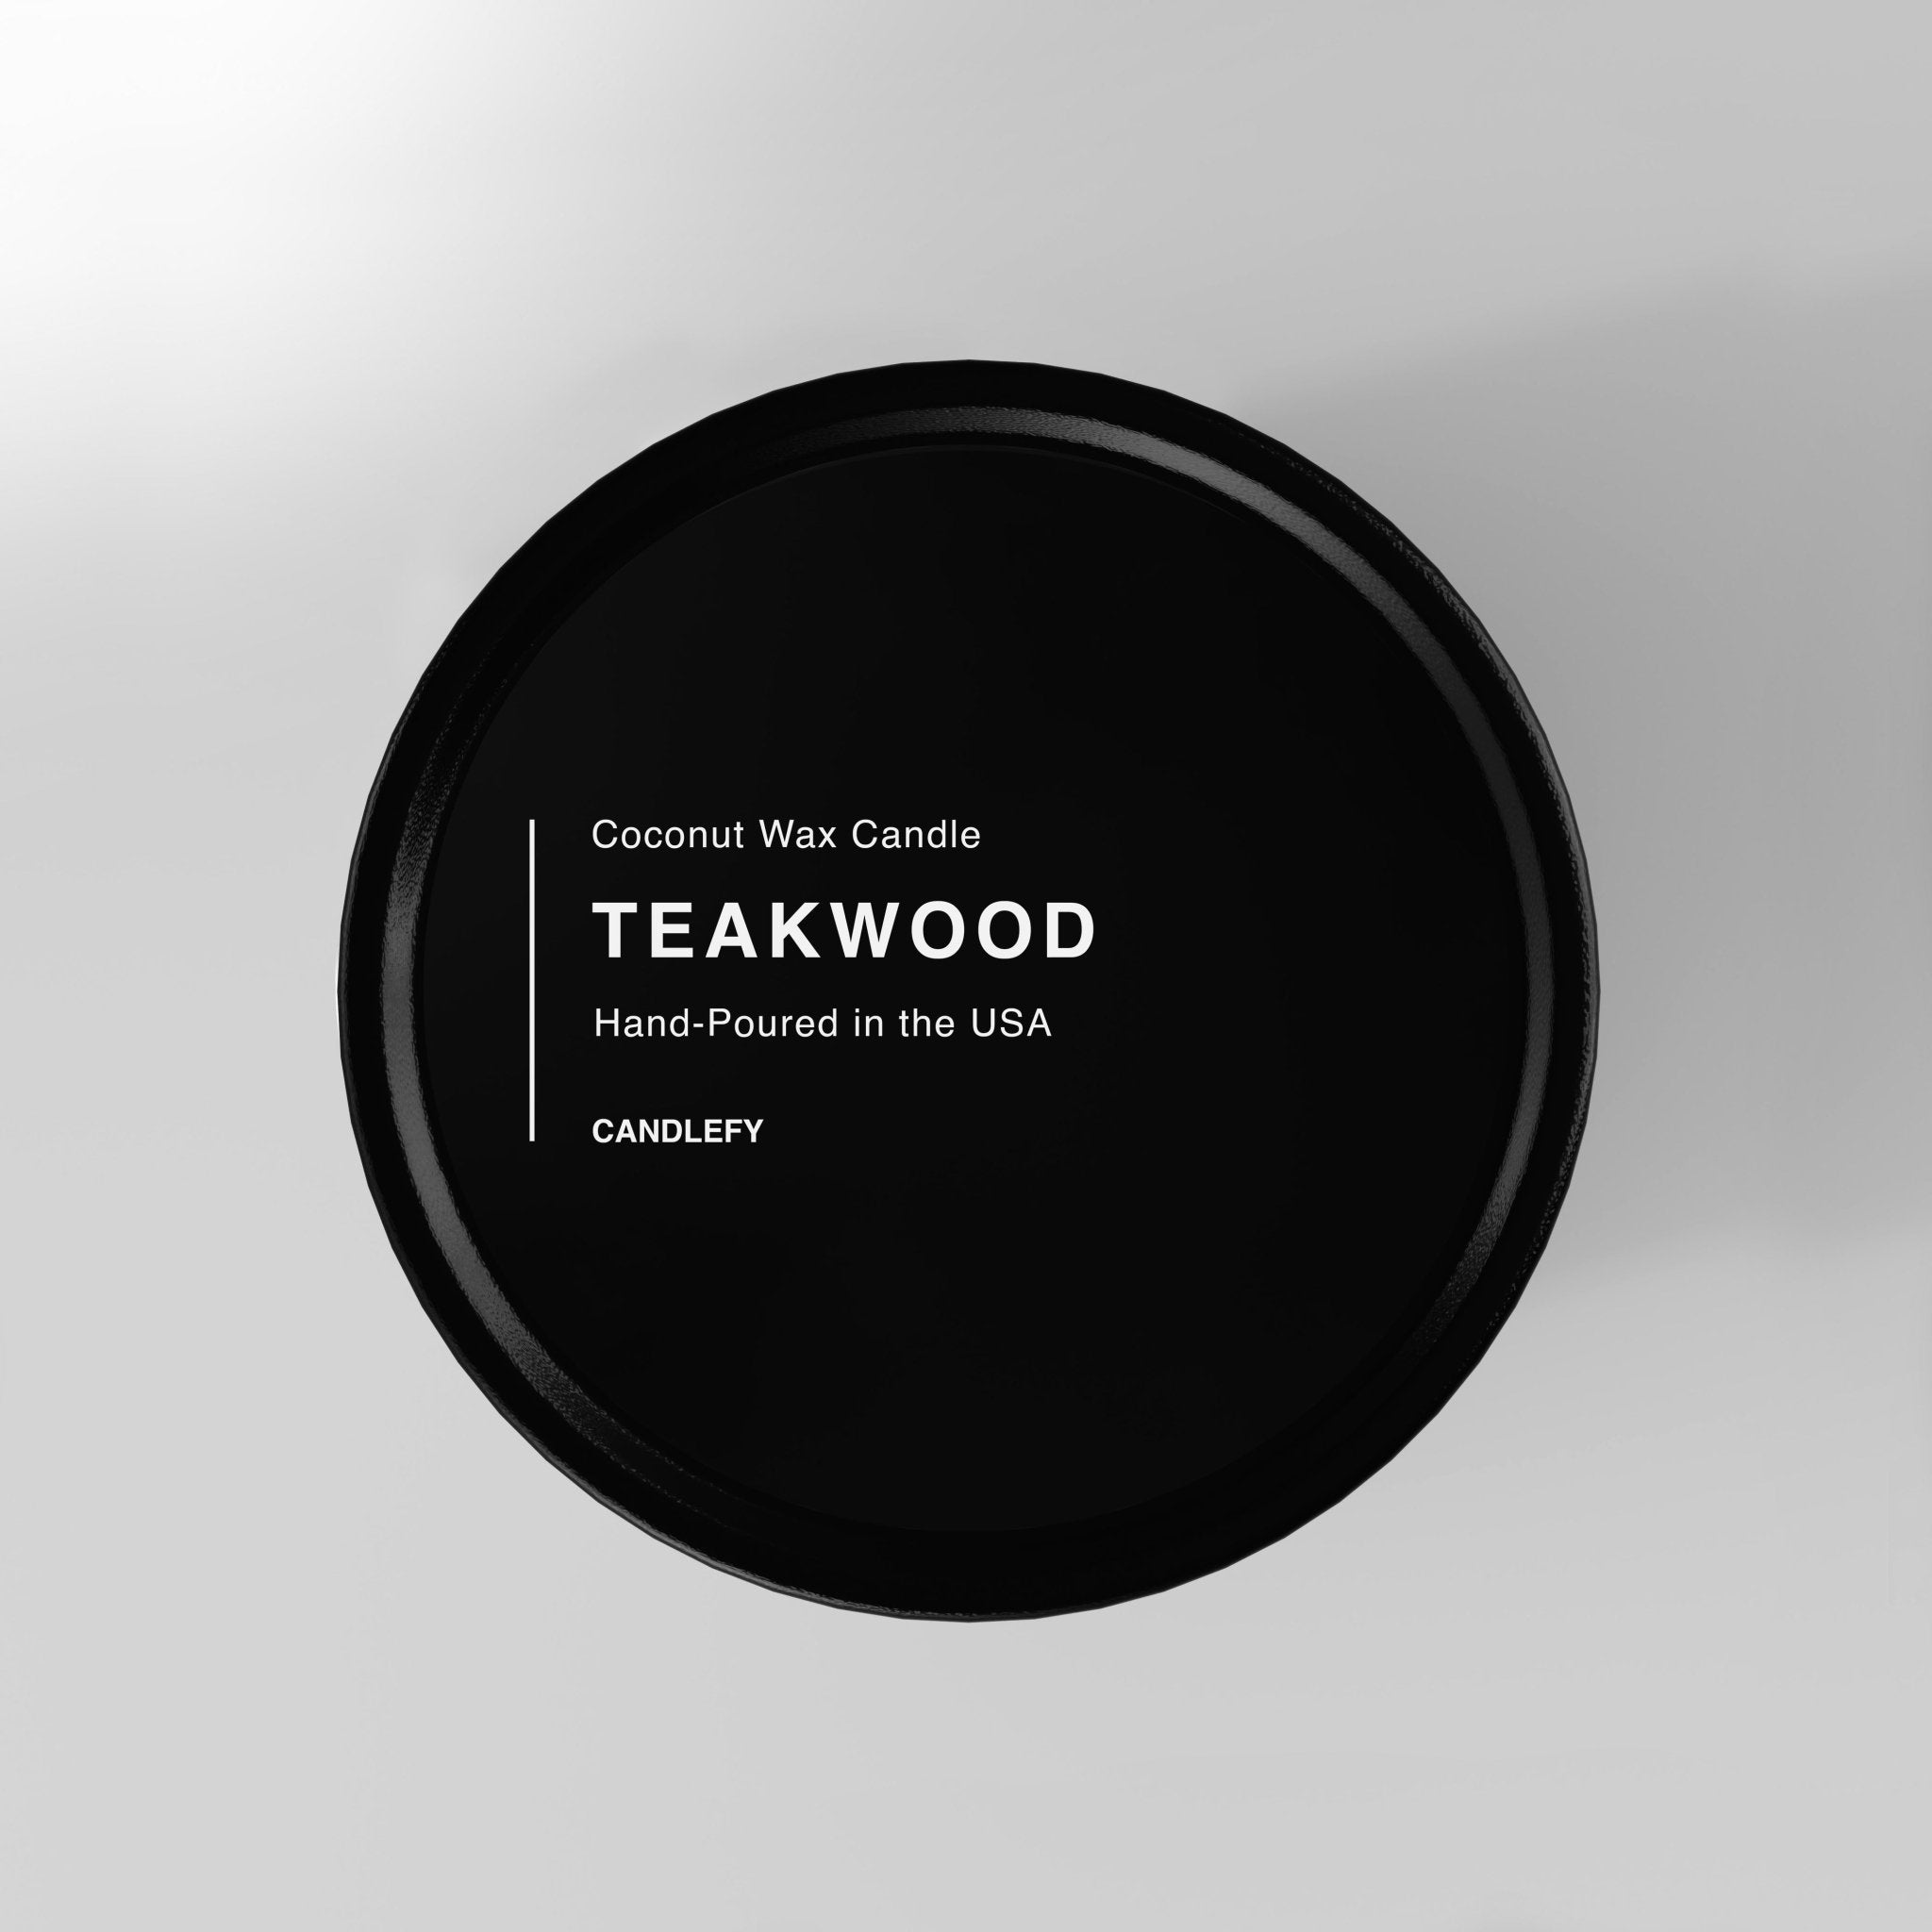 Teakwood Natural Wax Scented Candle in Black Travel Tin - Candlefy